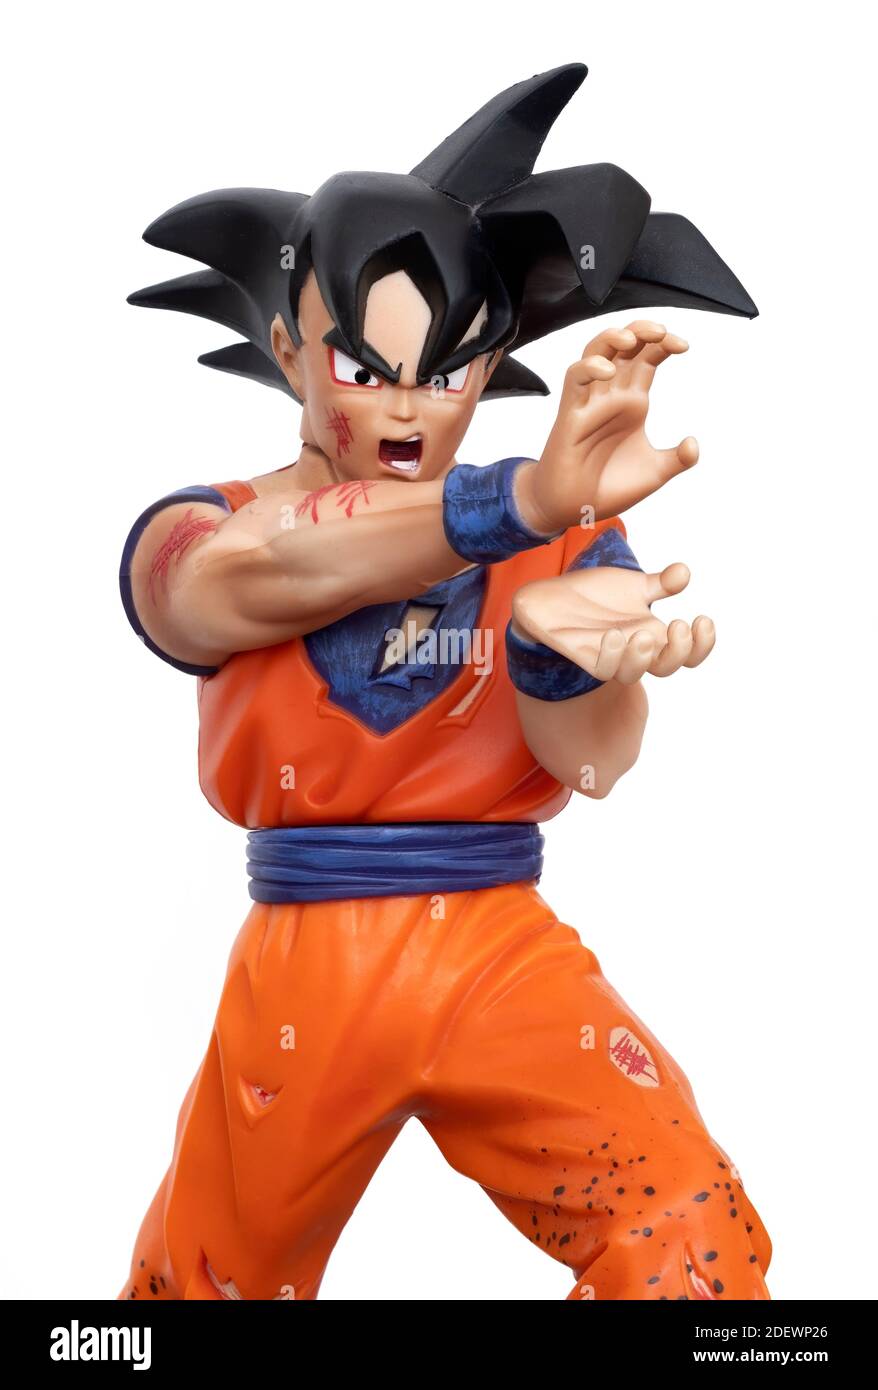 Collectable action figure of Son Goku, a fictional character and main protagonist of the Dragon Ball manga series created by Akira Toriyama. Stock Photo